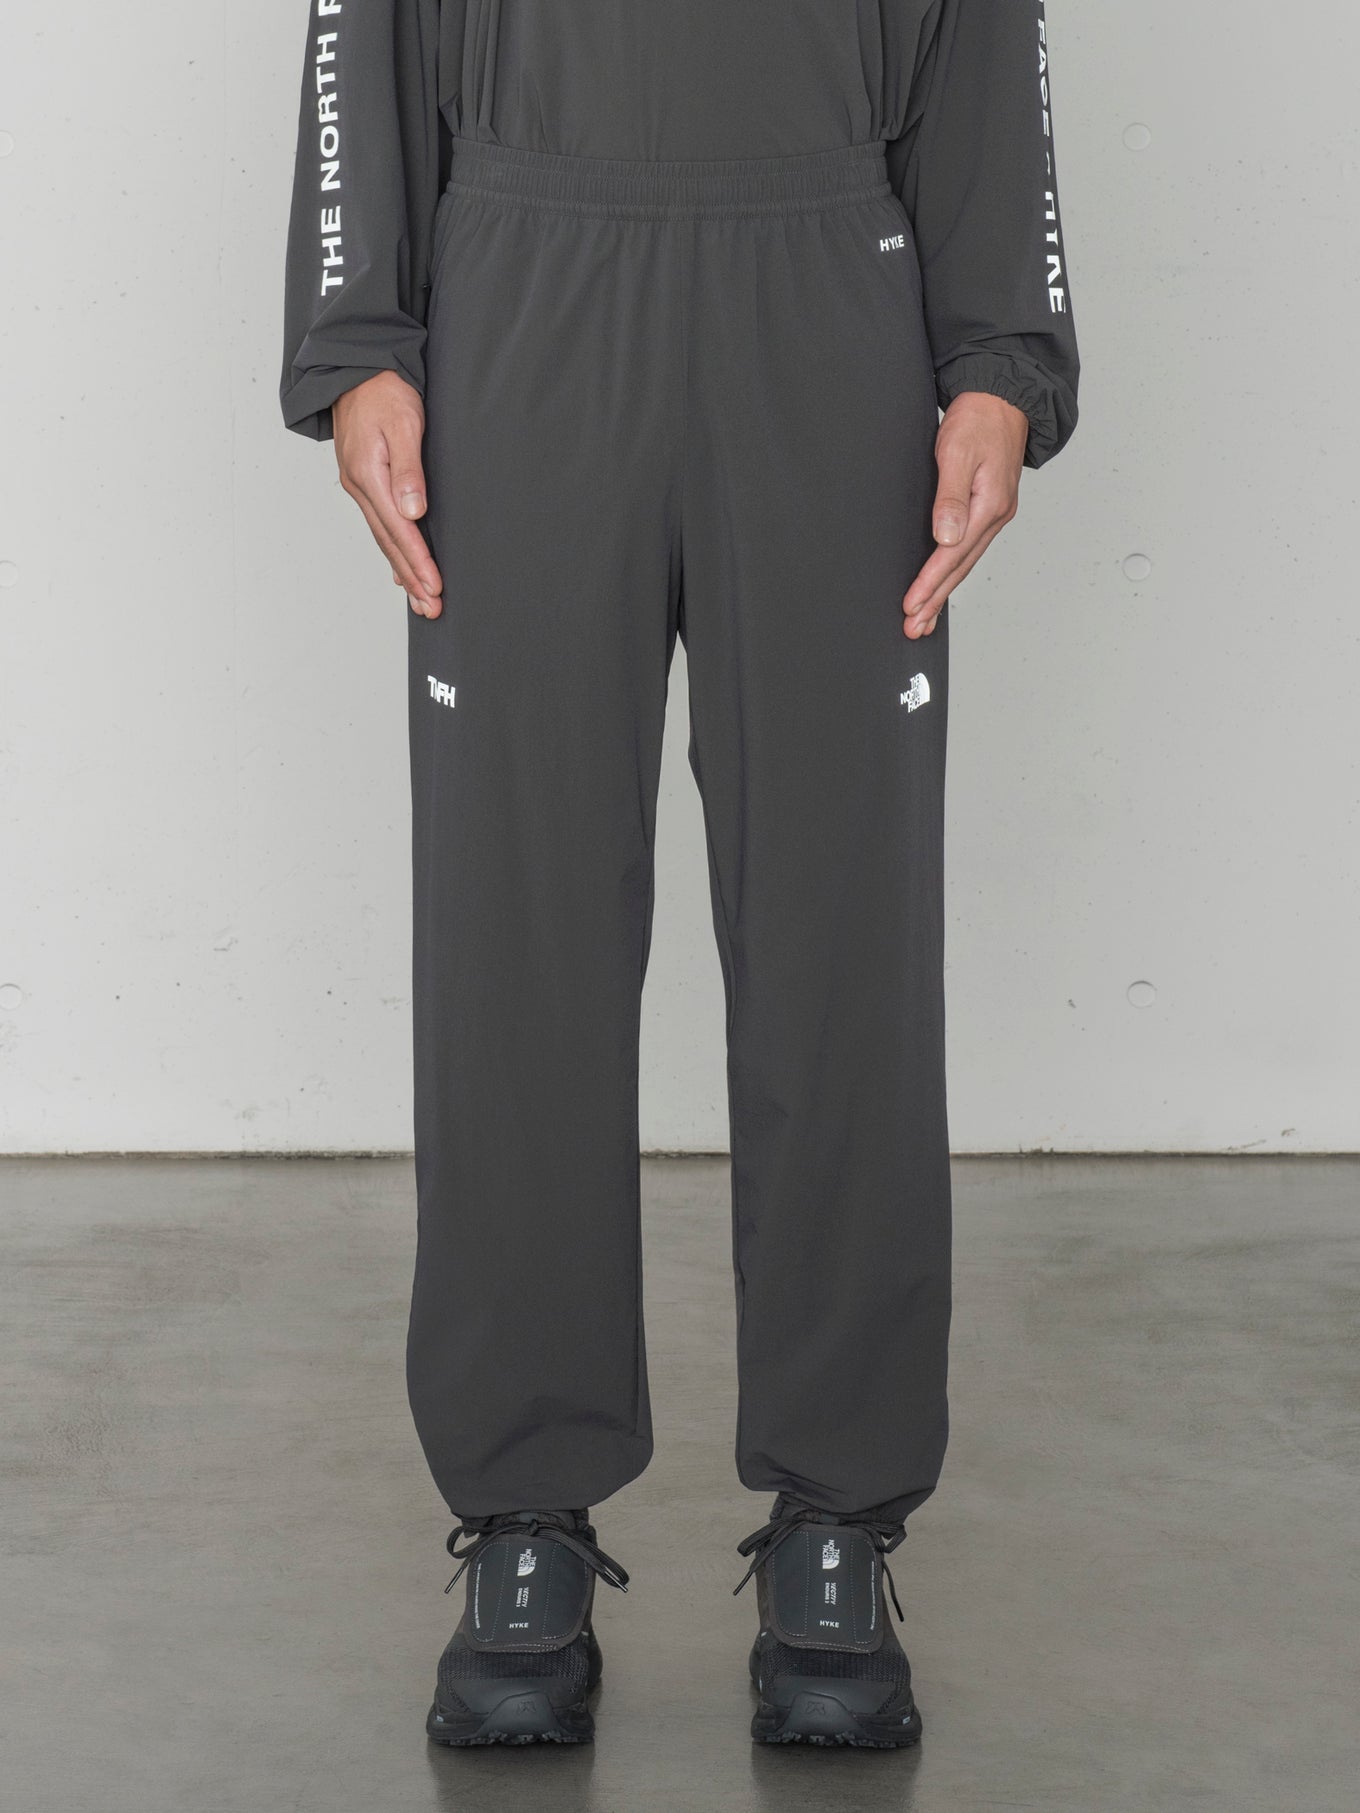 Trail Wind Pant (Mens)TNFH THE NORTH FACE × HYKE – HYKE ONLINE STORE